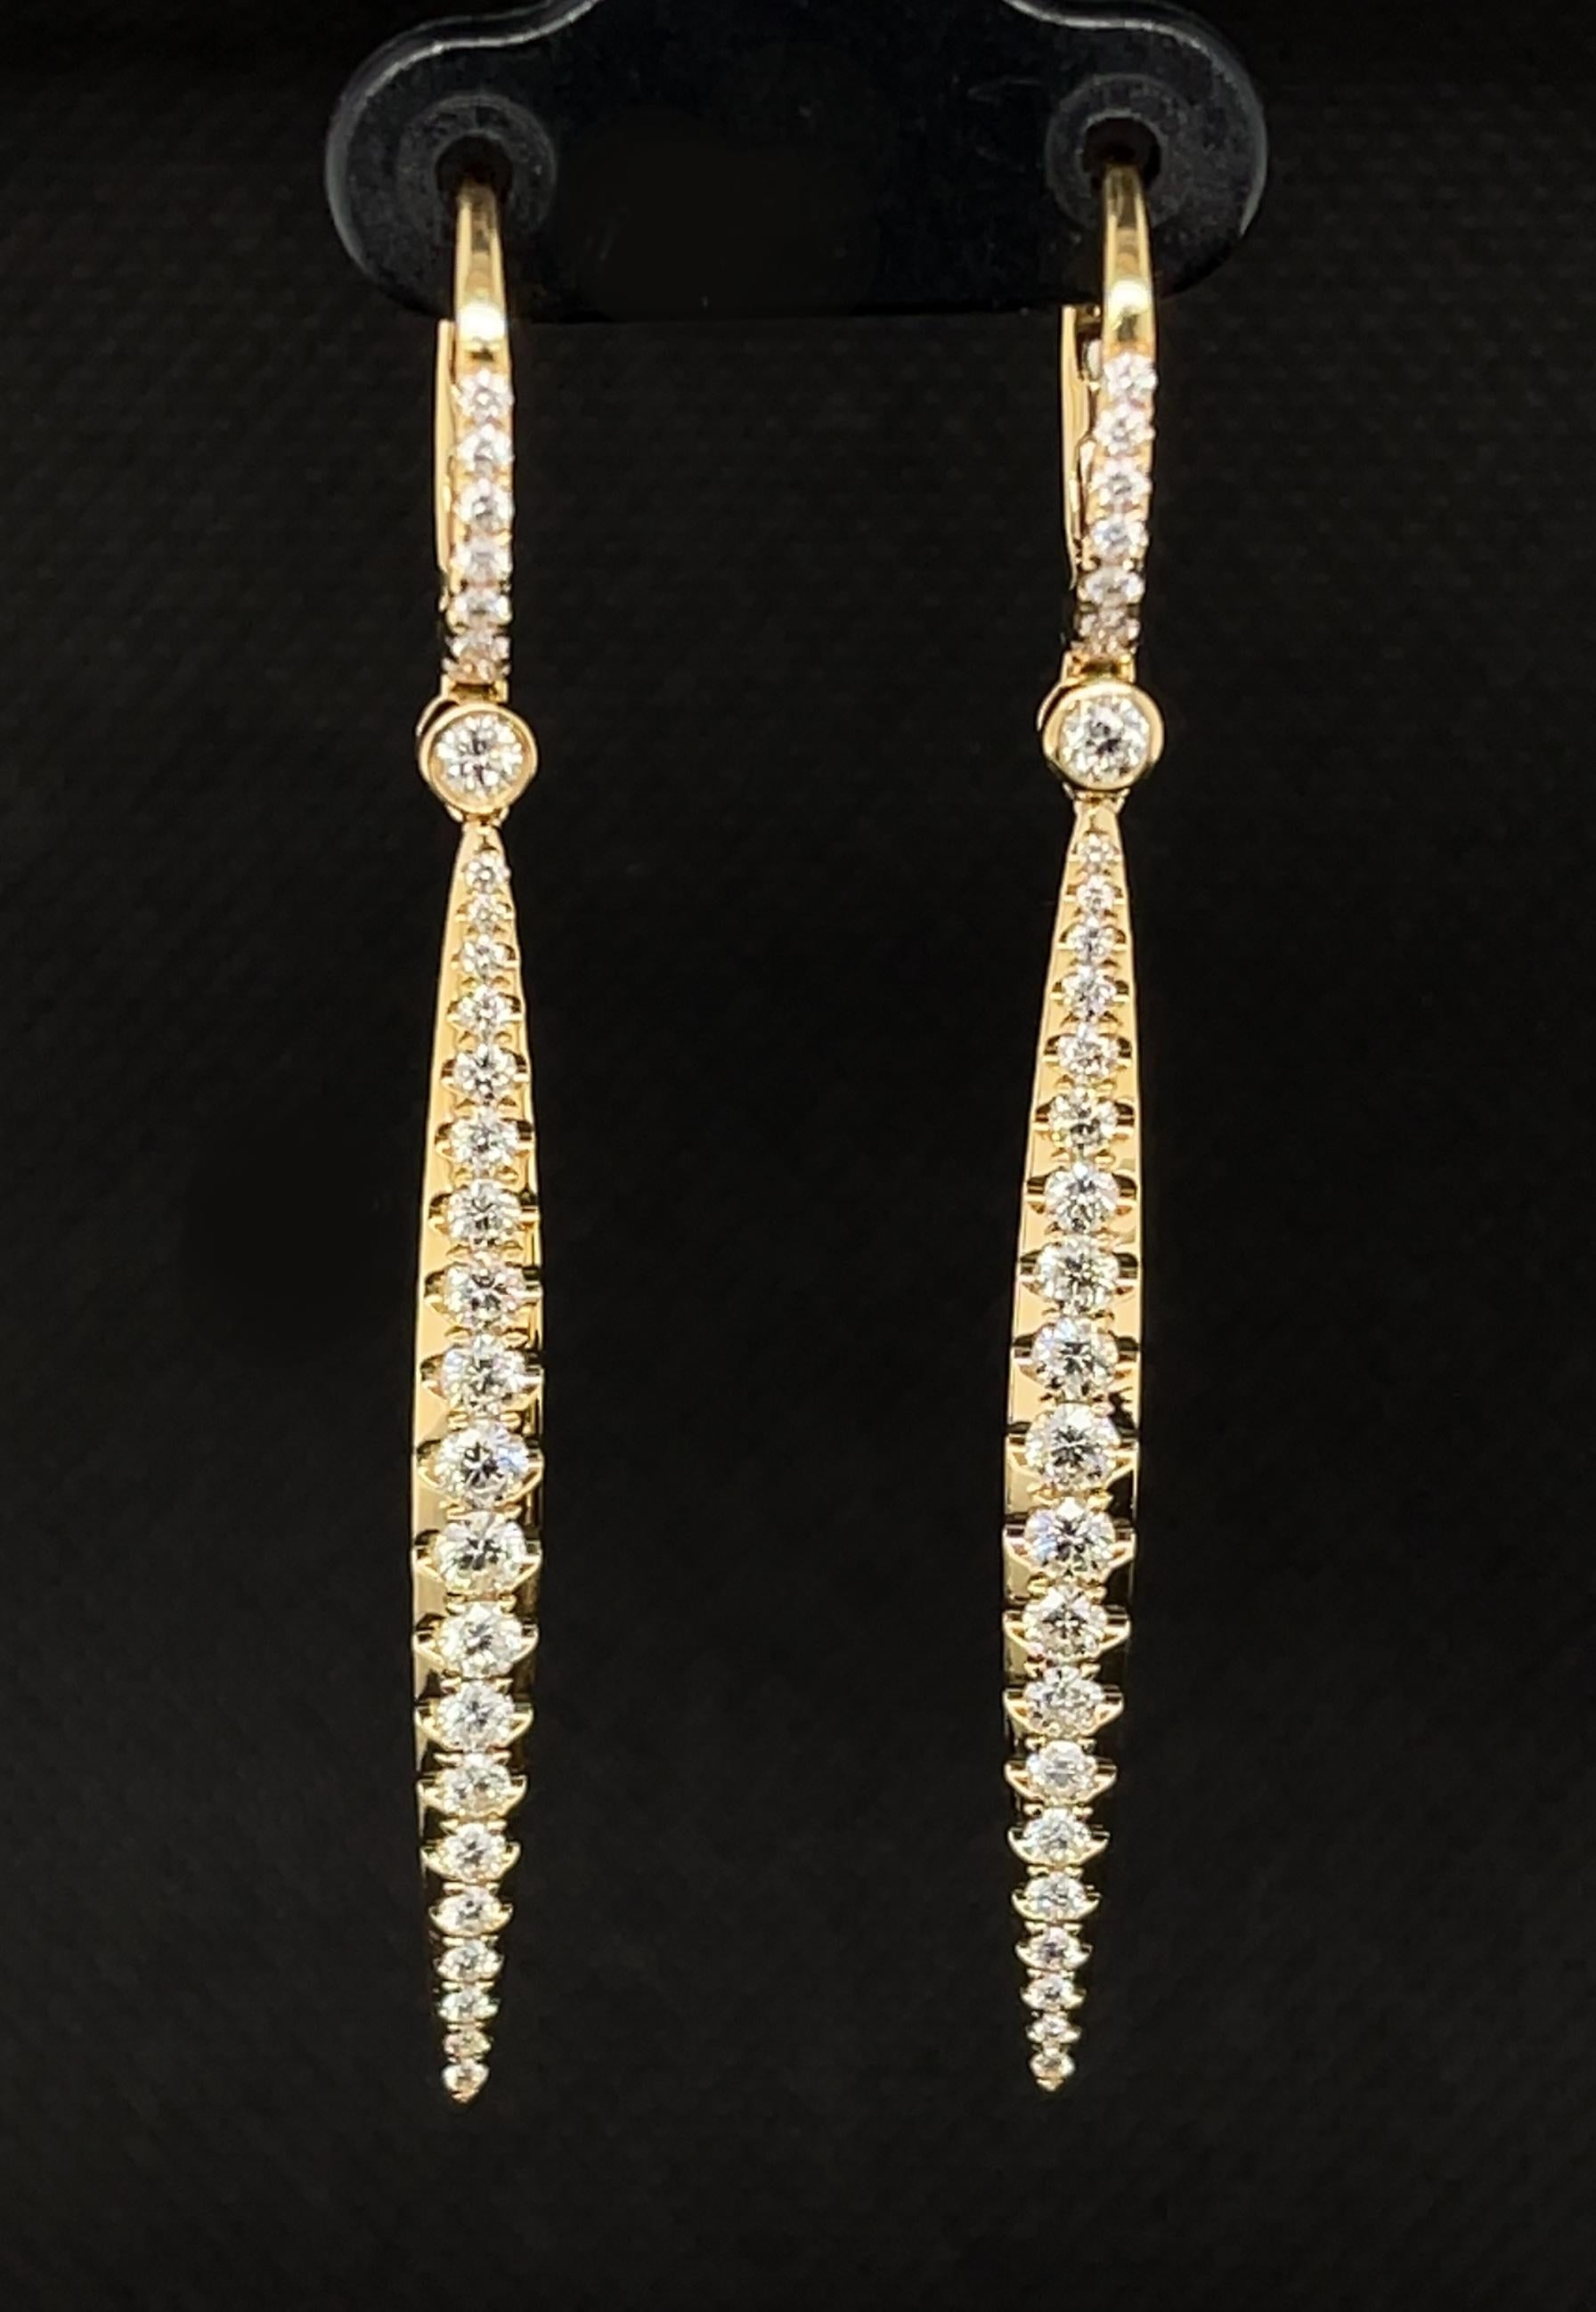 Diamond Pave Linear Dangling Earrings in Yellow Gold, 1.31 Carats Total  In New Condition For Sale In Los Angeles, CA